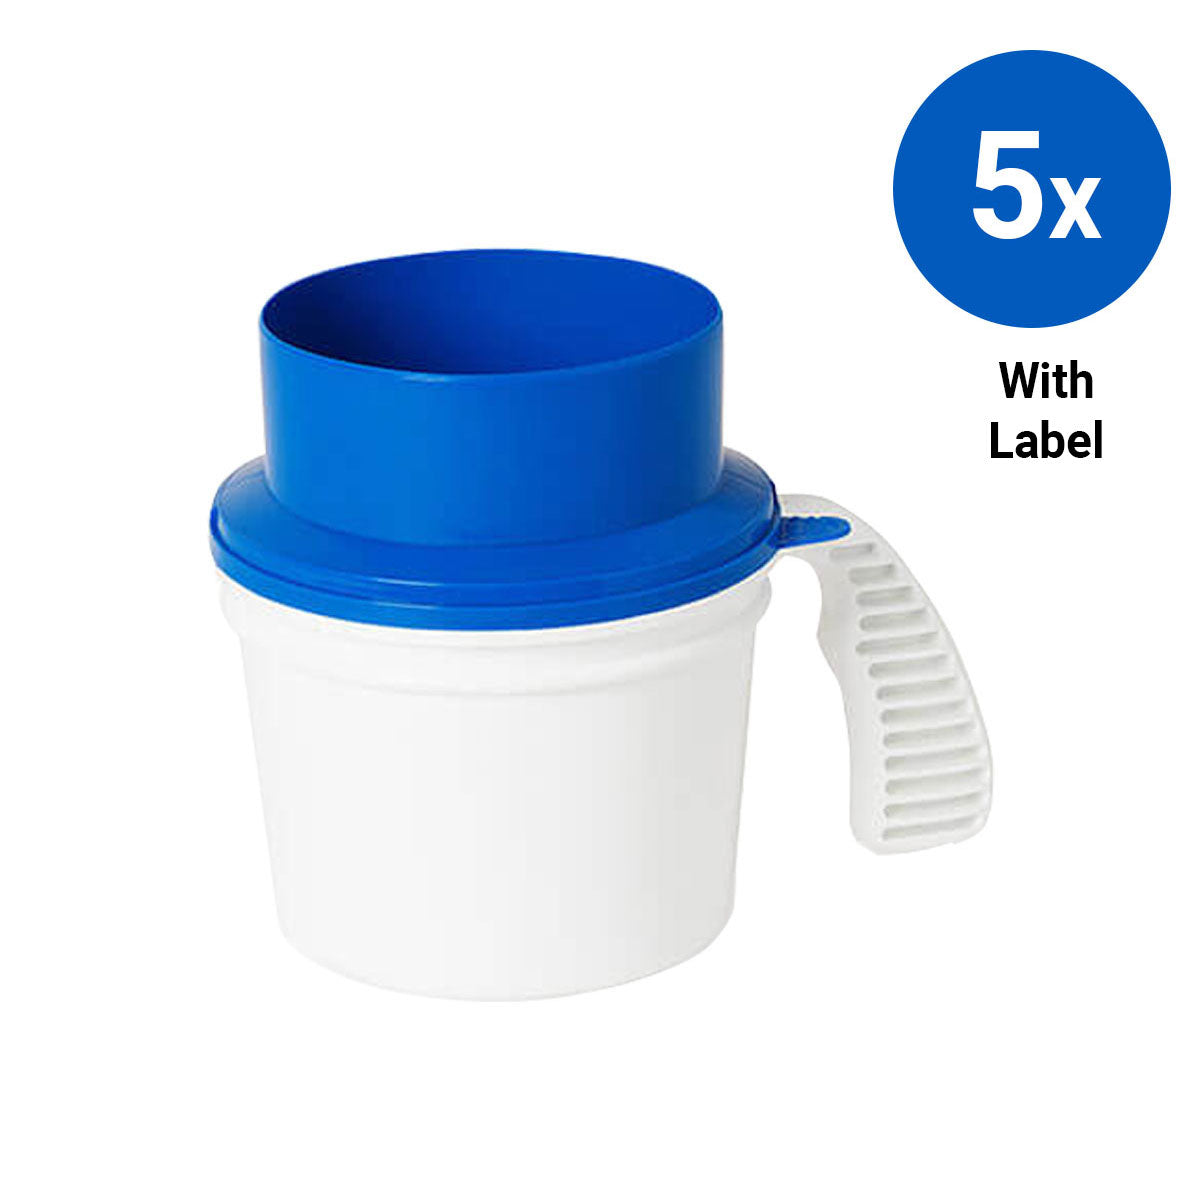 5x Collection Container Base and Quick Drop Lid with Labels - Blue